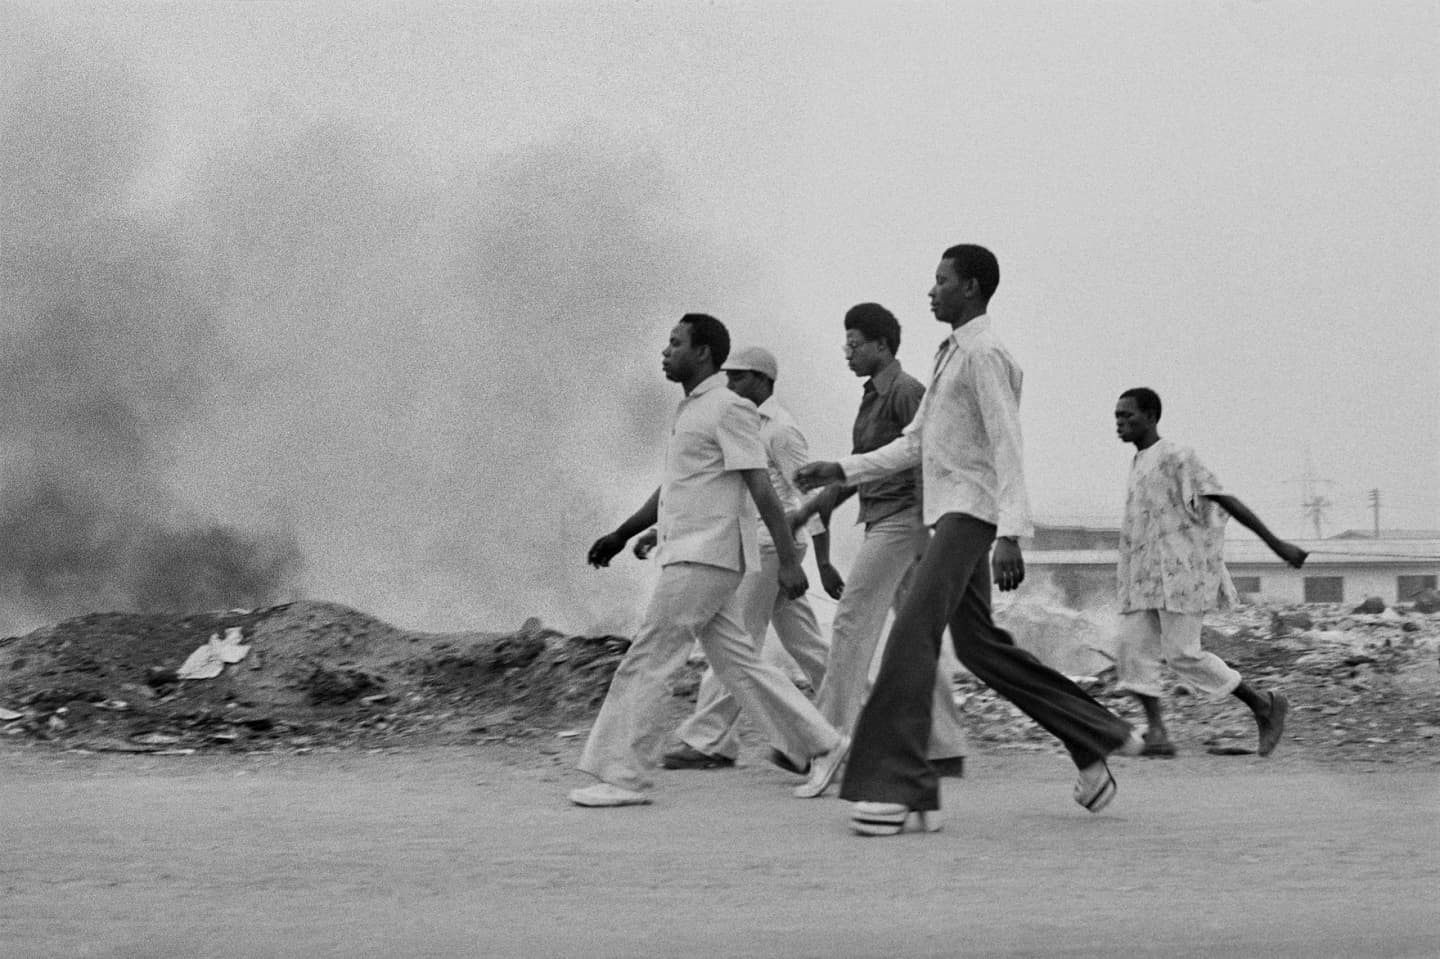 A group of men walking at FESTAC ’77. Copyright: Marilyn Nance / Artists Rights Society (ARS), New York.